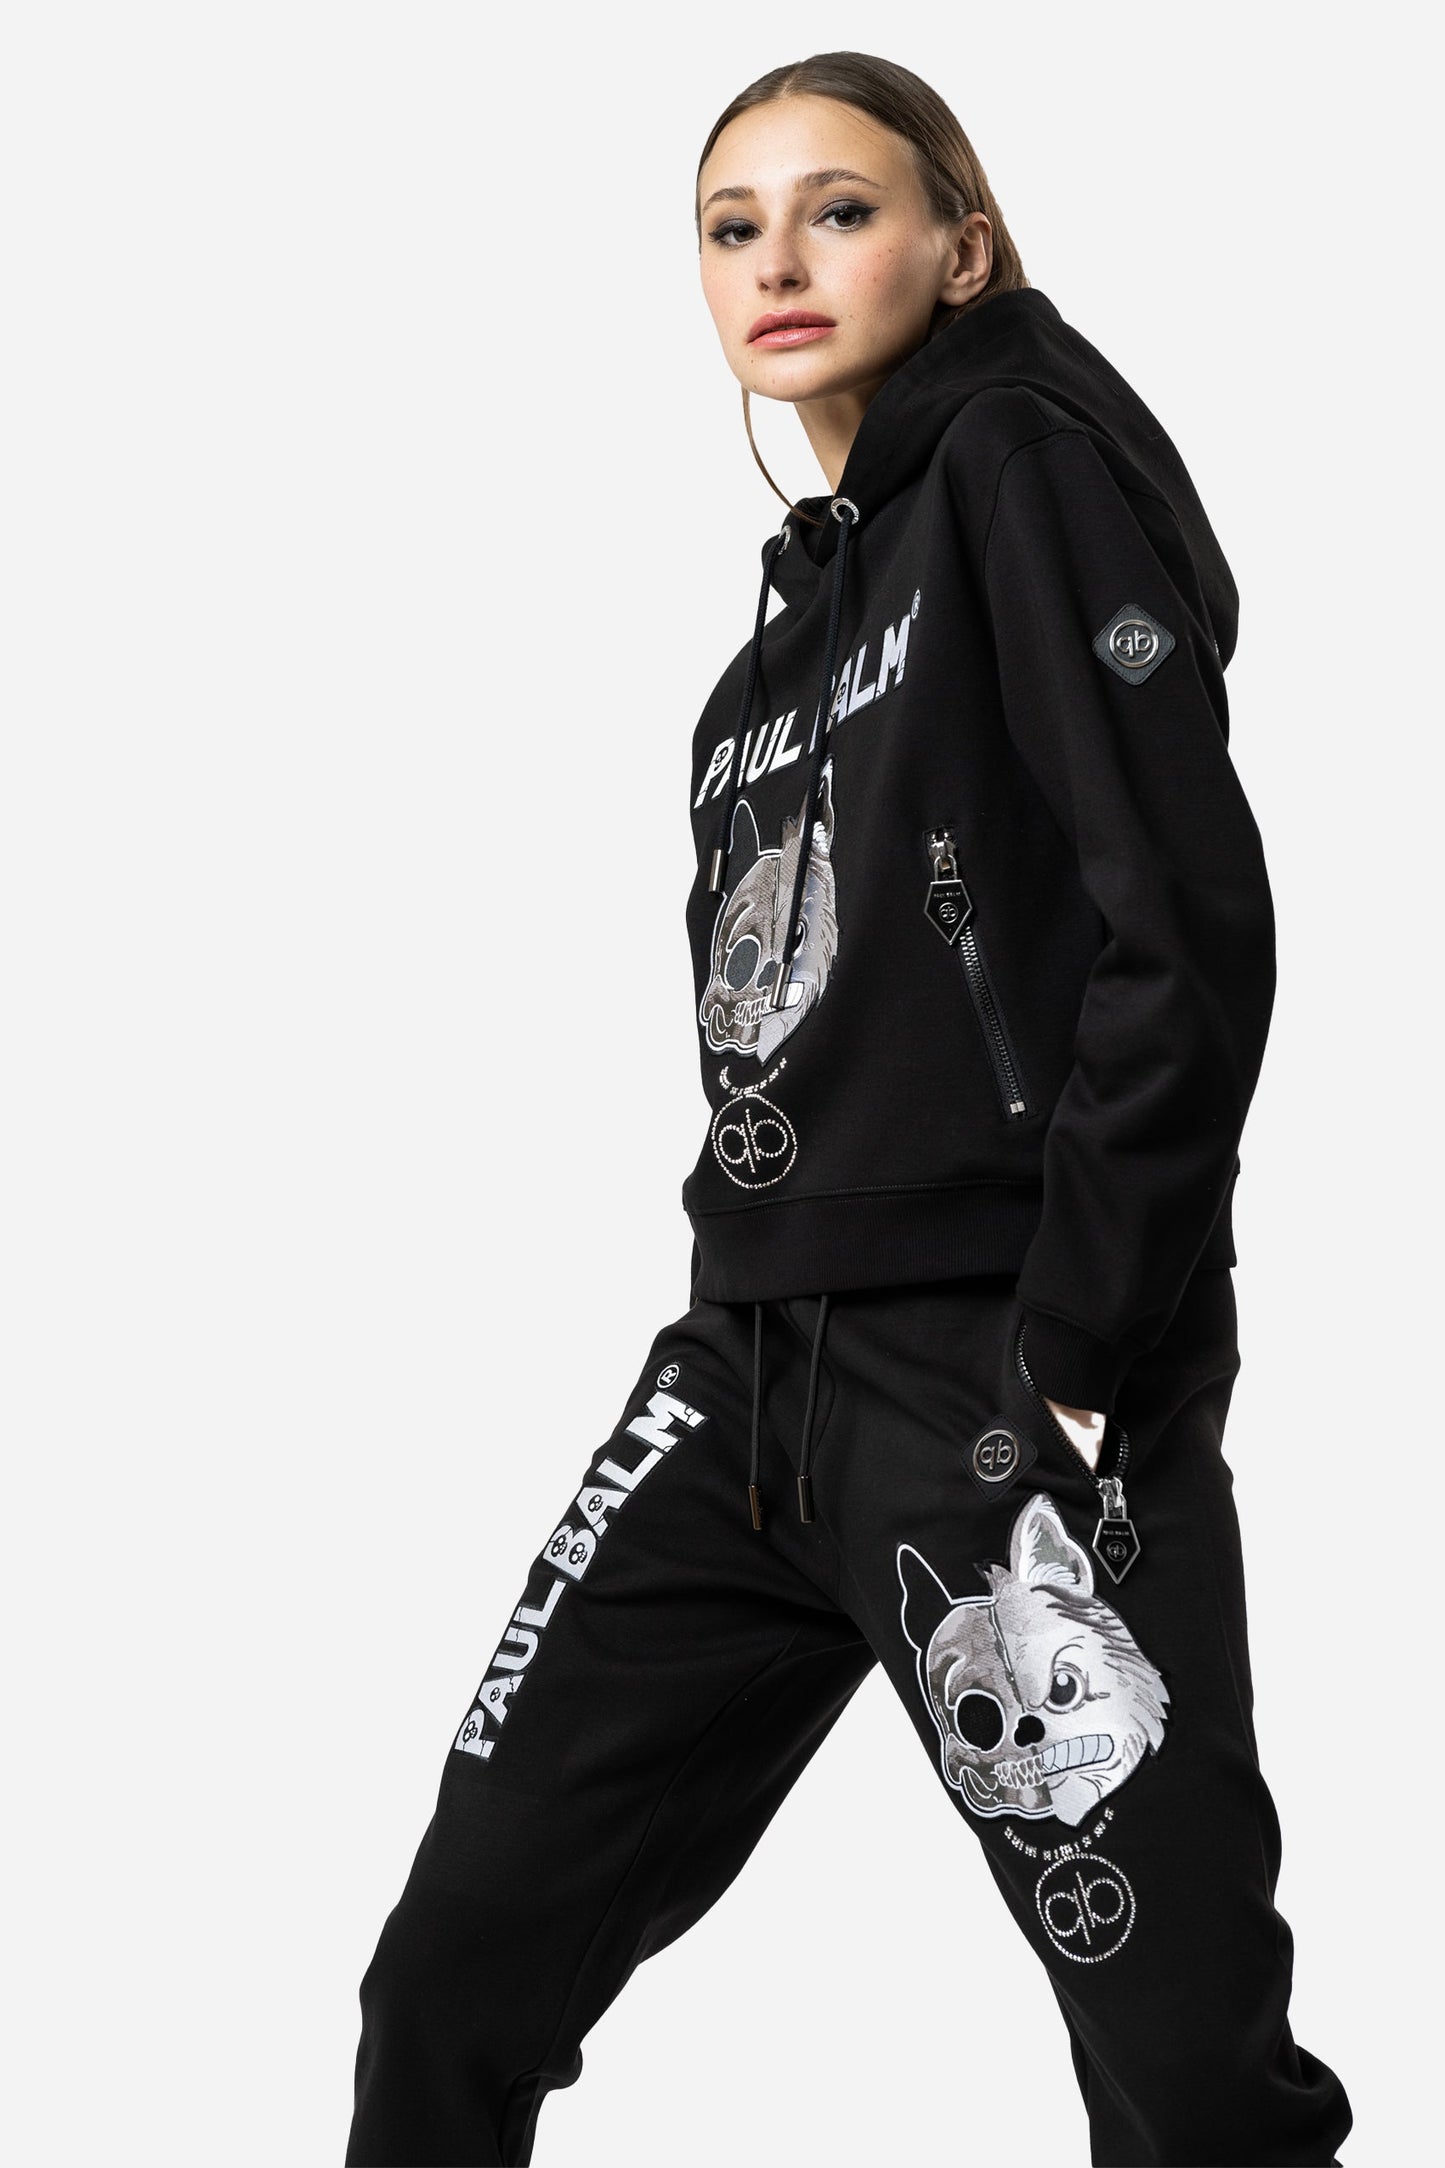 Scull Embroidery Hoodie - Limited to 300